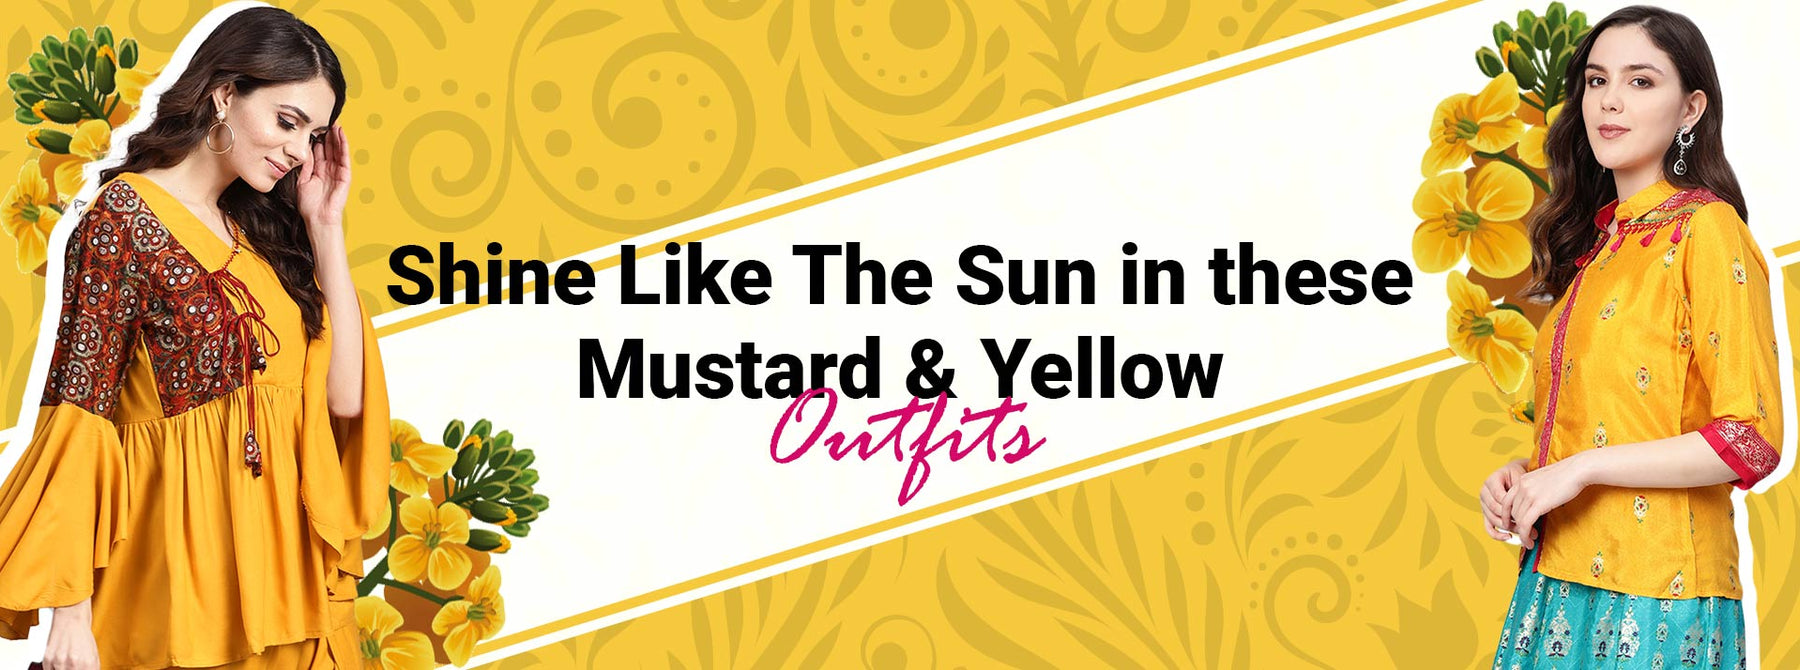 Shine like the Sun in these Mustard & Yellow Outfits